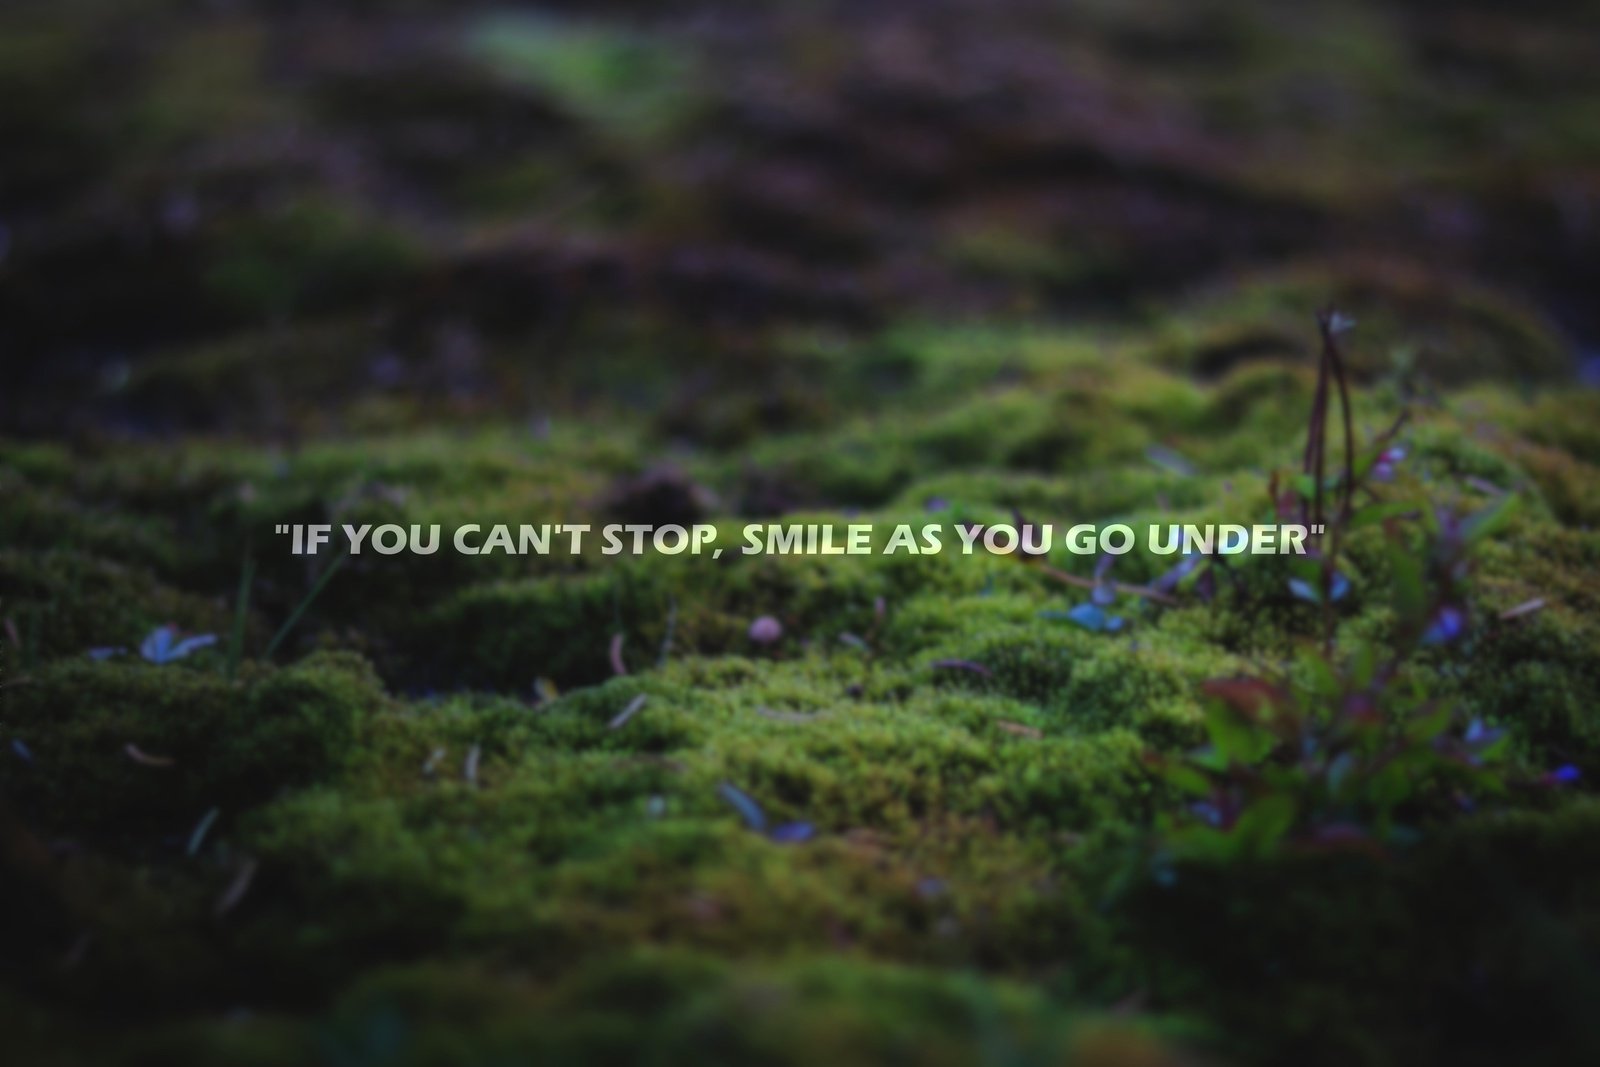 SH - "If you can't stop, smile as you go under" - 17 1/2" x 1/2"